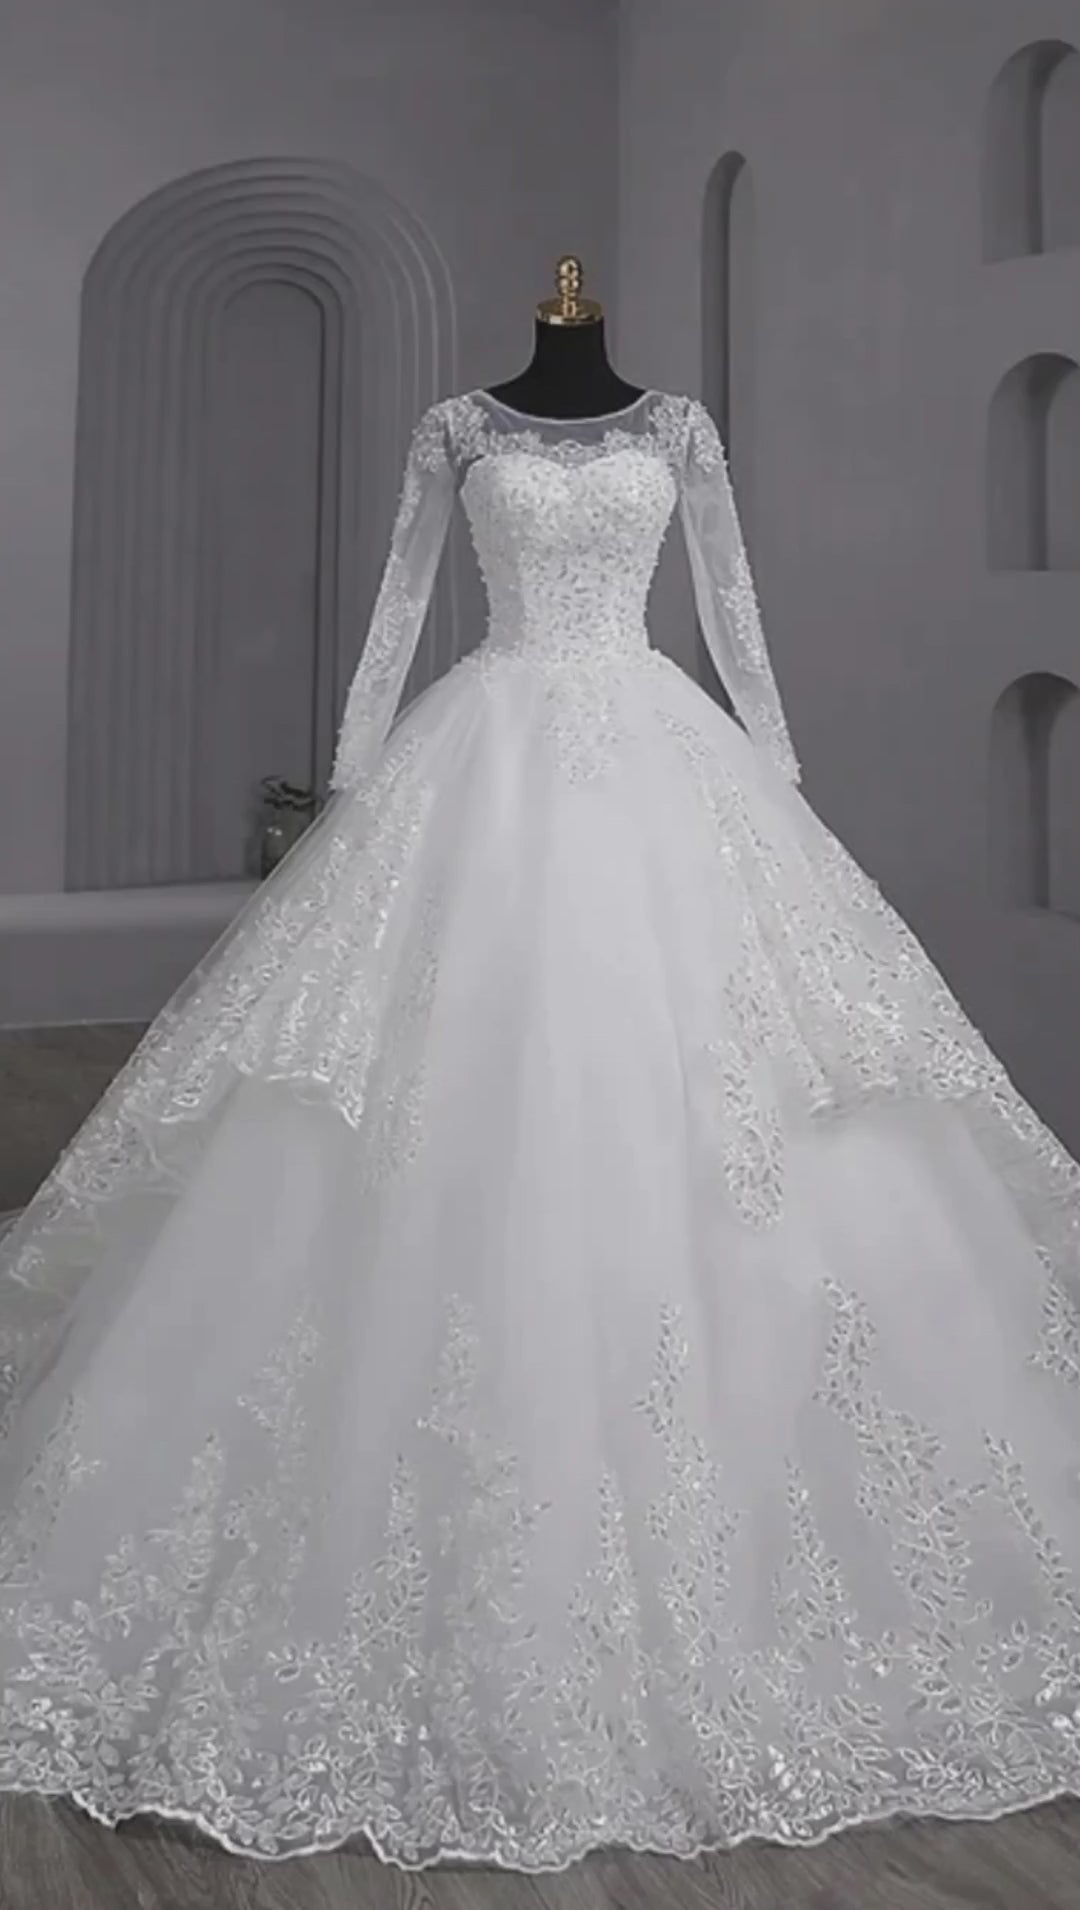 First Look: Christian Siriano's New Bridal Collection For Kleinfeld |  BridalGuide